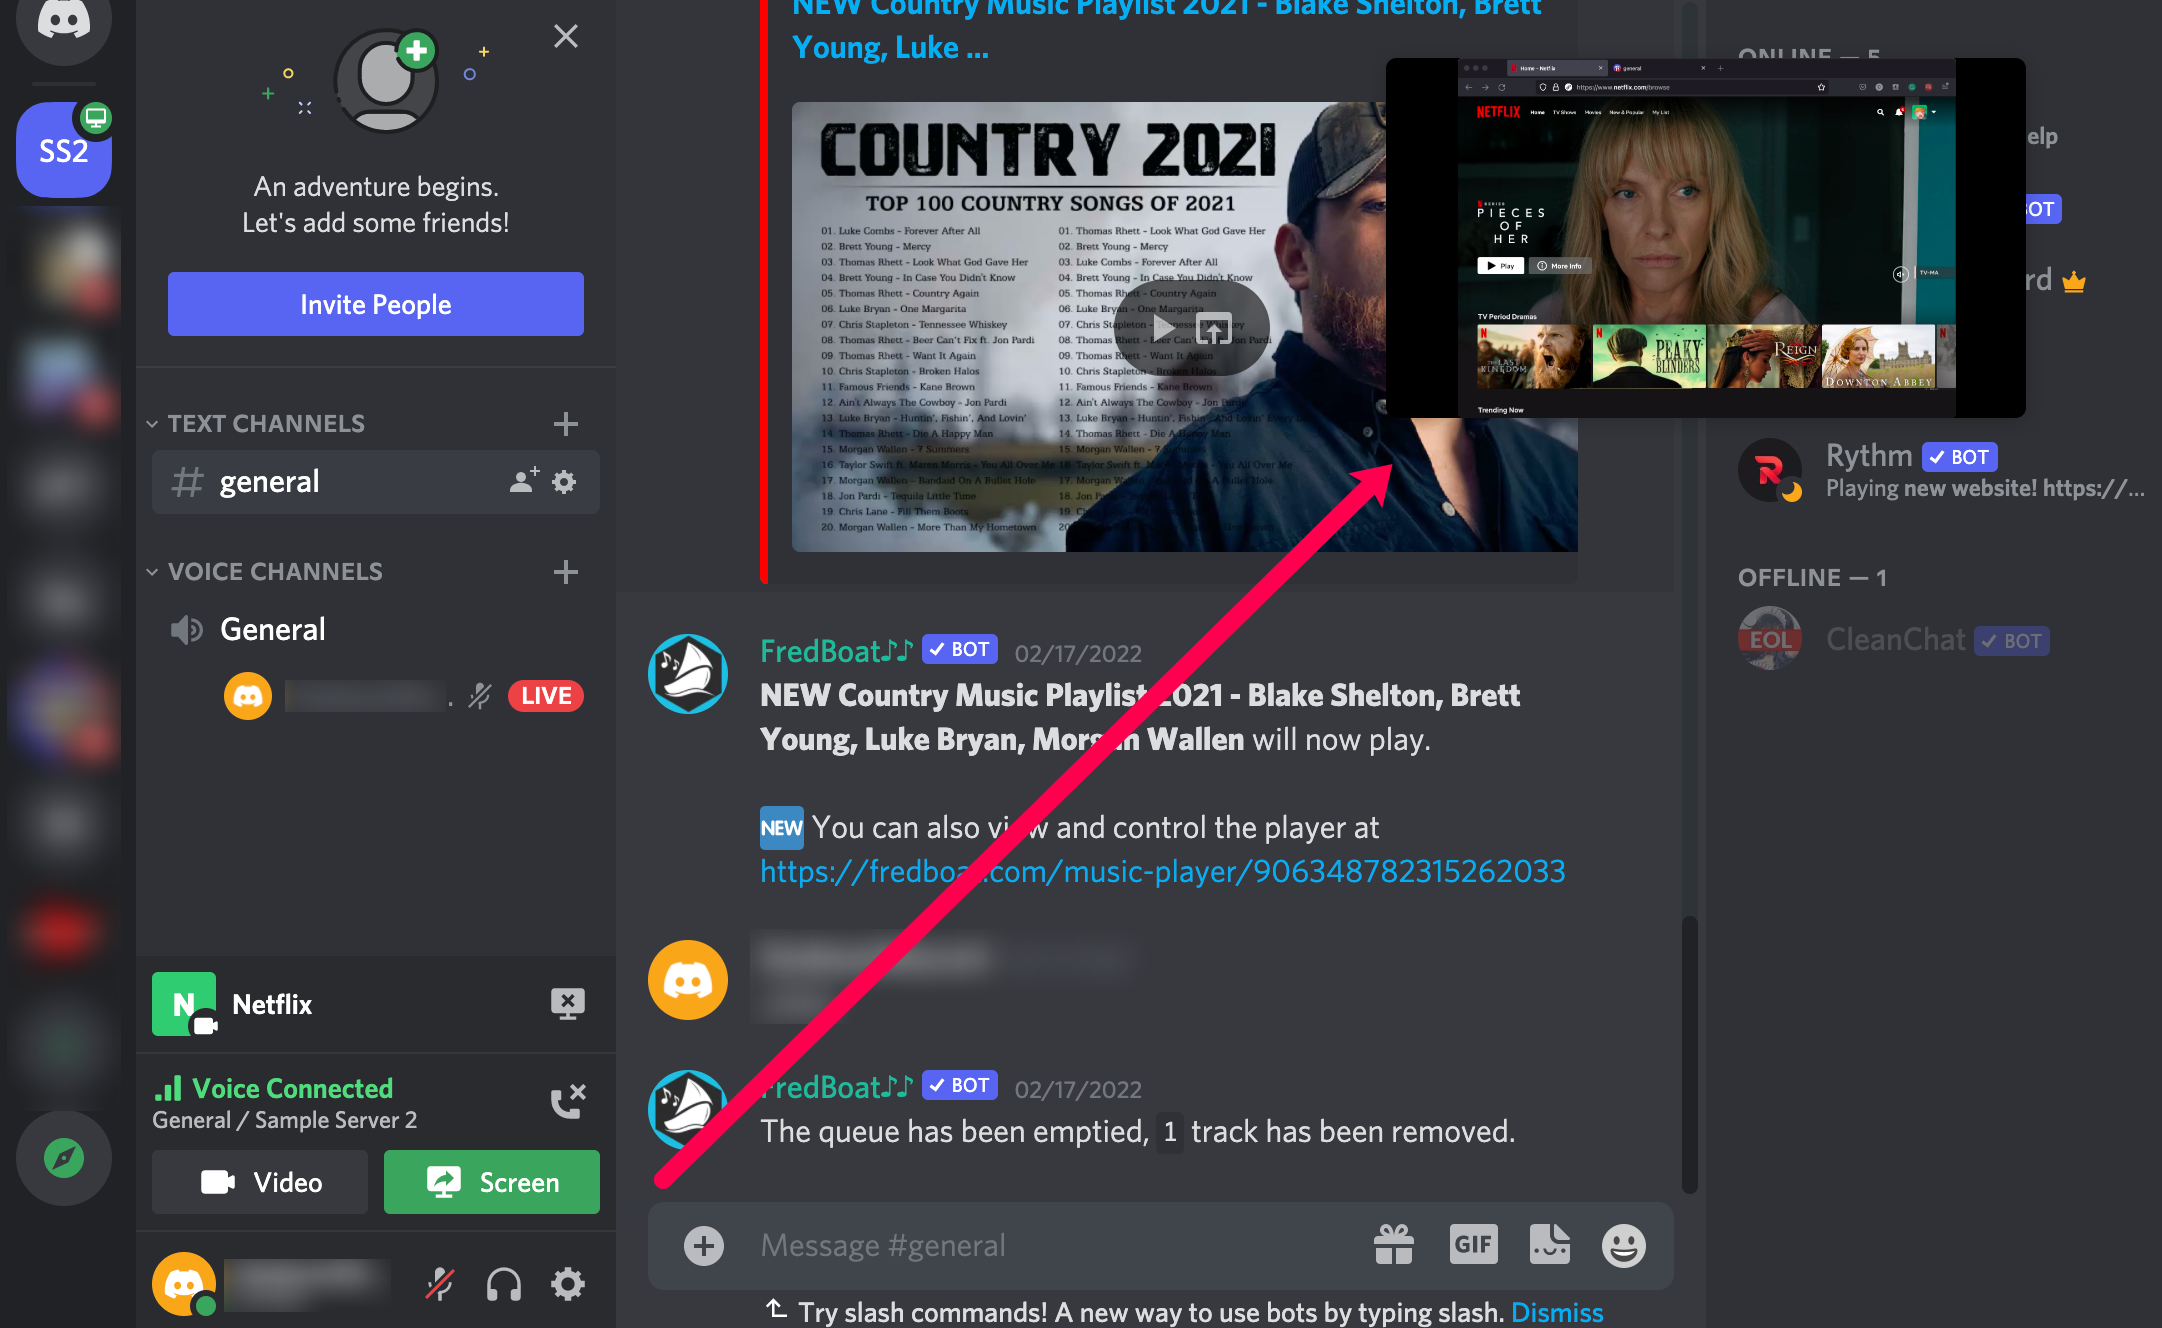 Discord's 'Go Live' lets gamers stream to up to 10 people